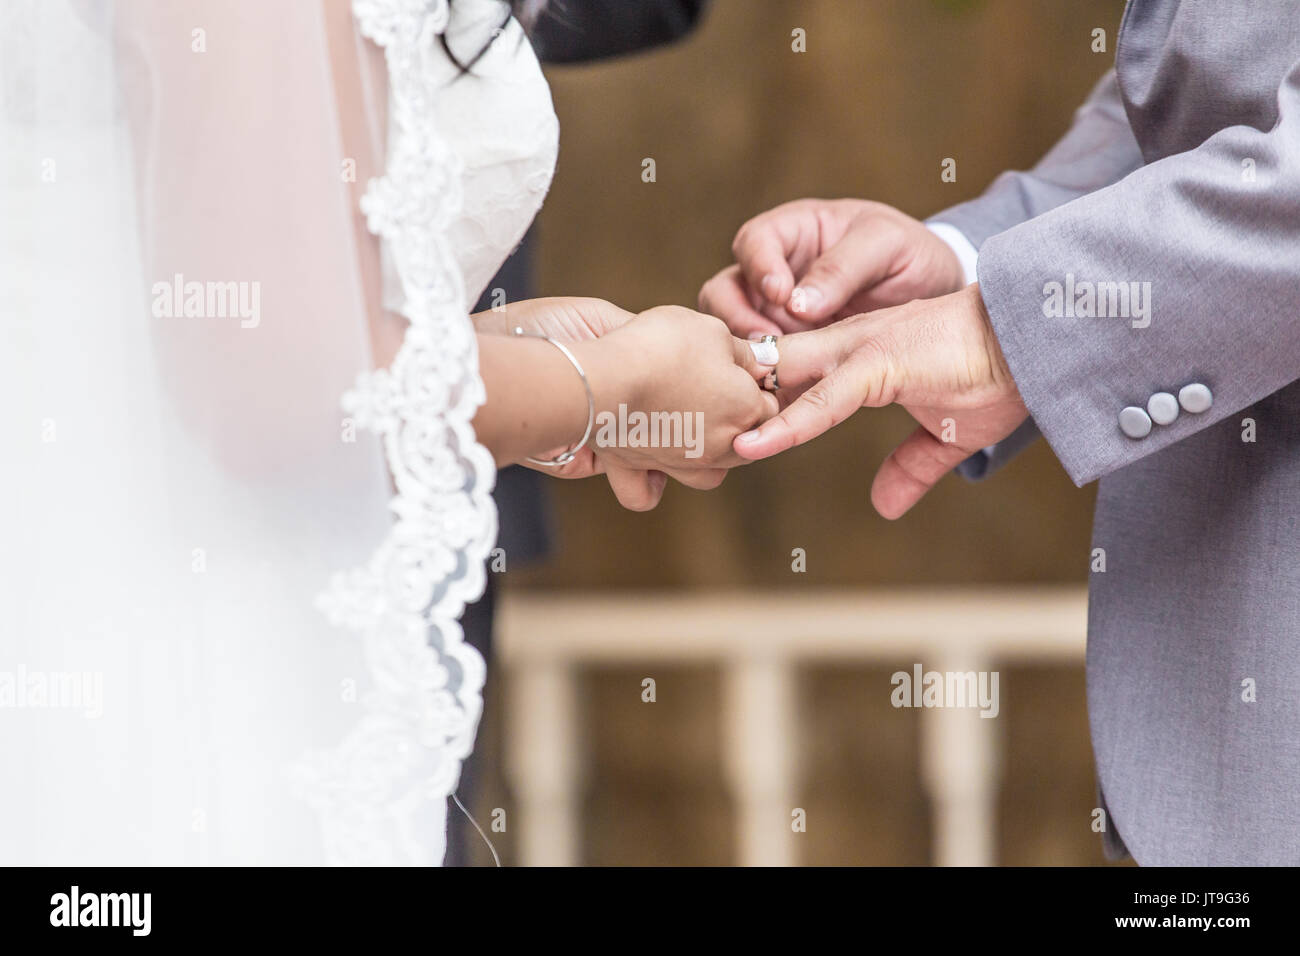 Two people getting married Stock Photo